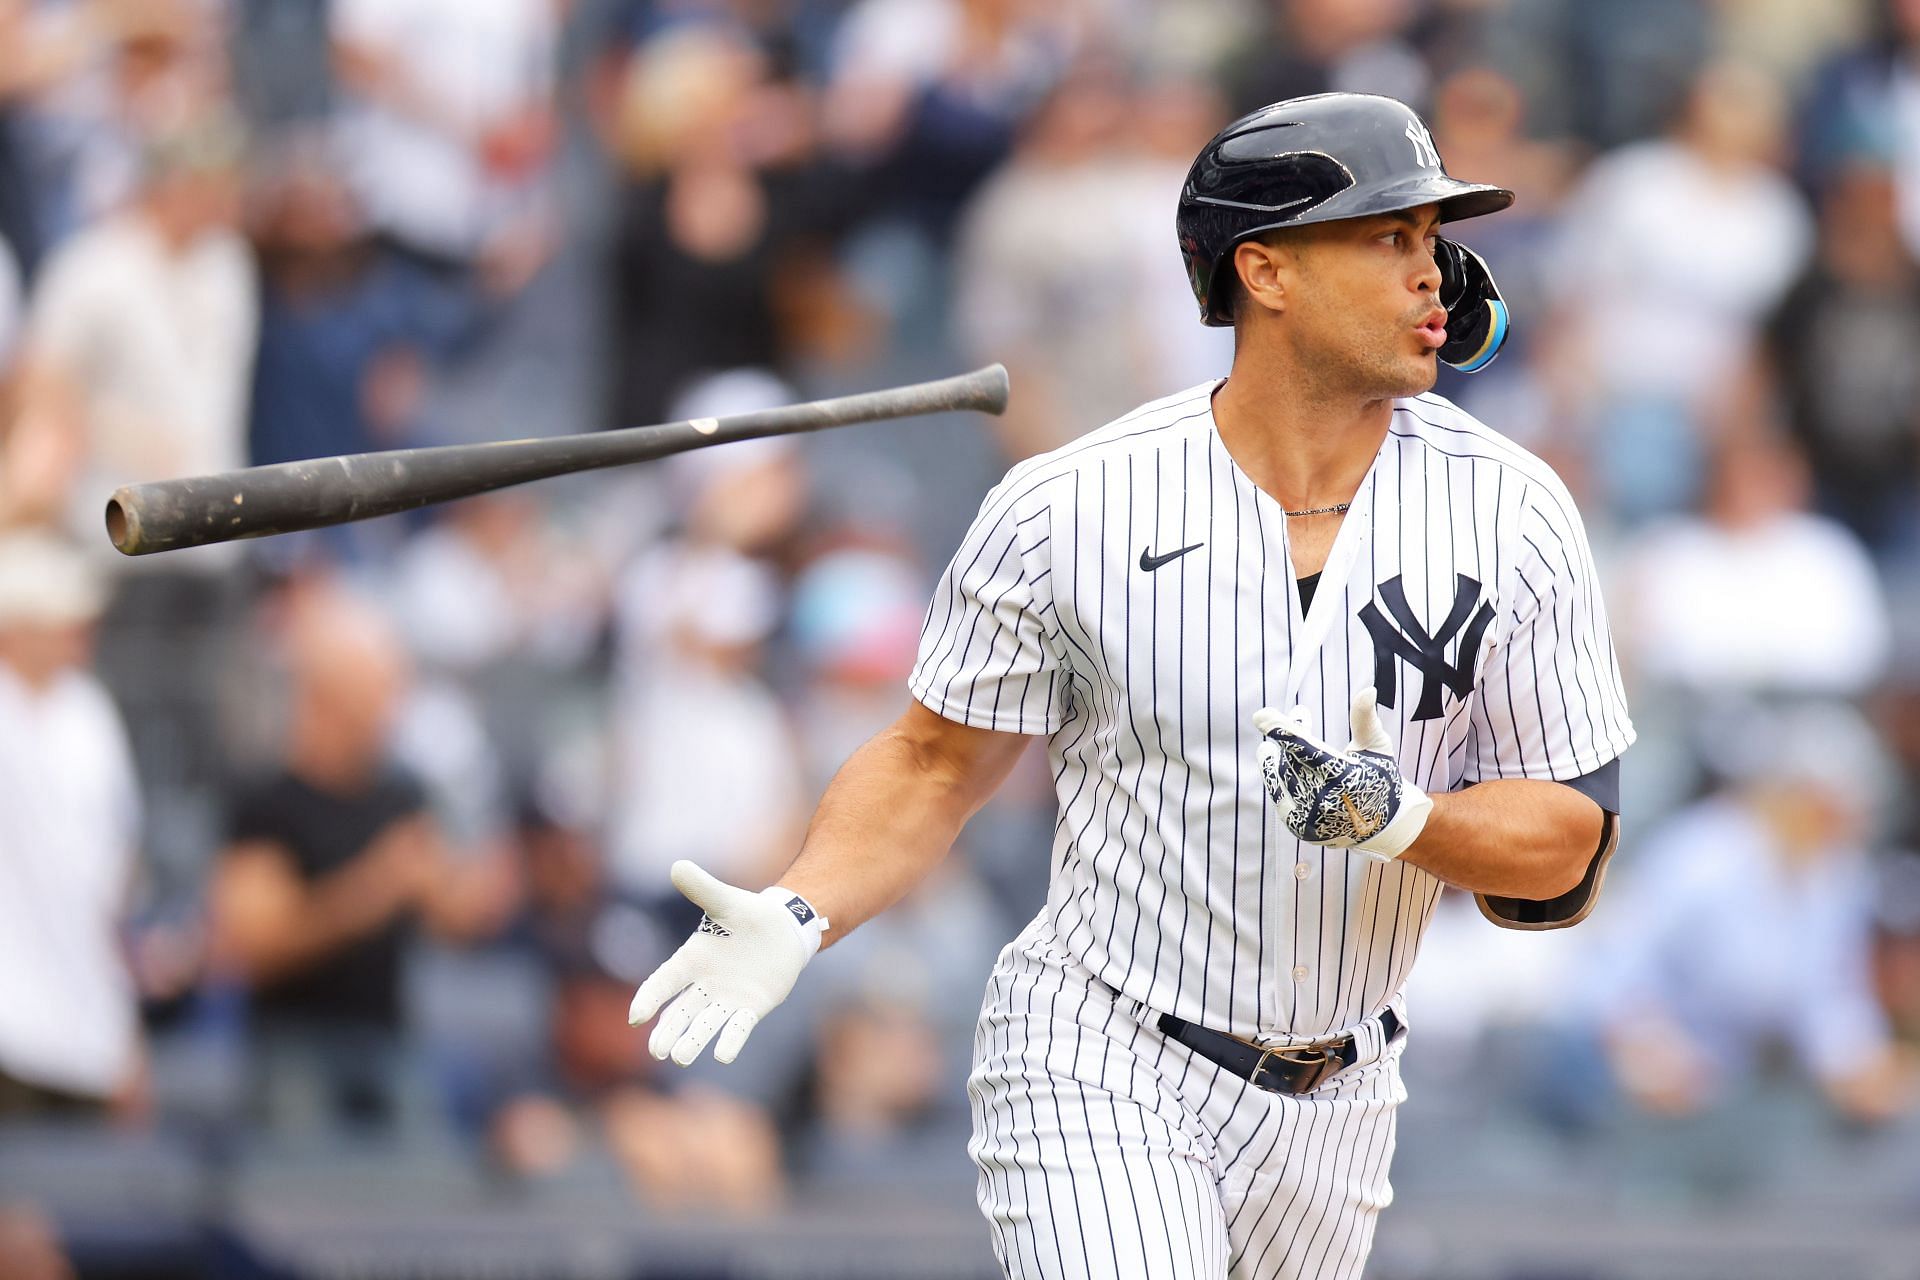 Giancarlo Stanton of the New York Yankees hits a two-run double in the seventh inning against the Minnesota Twins at Yankee Stadium on April 15.